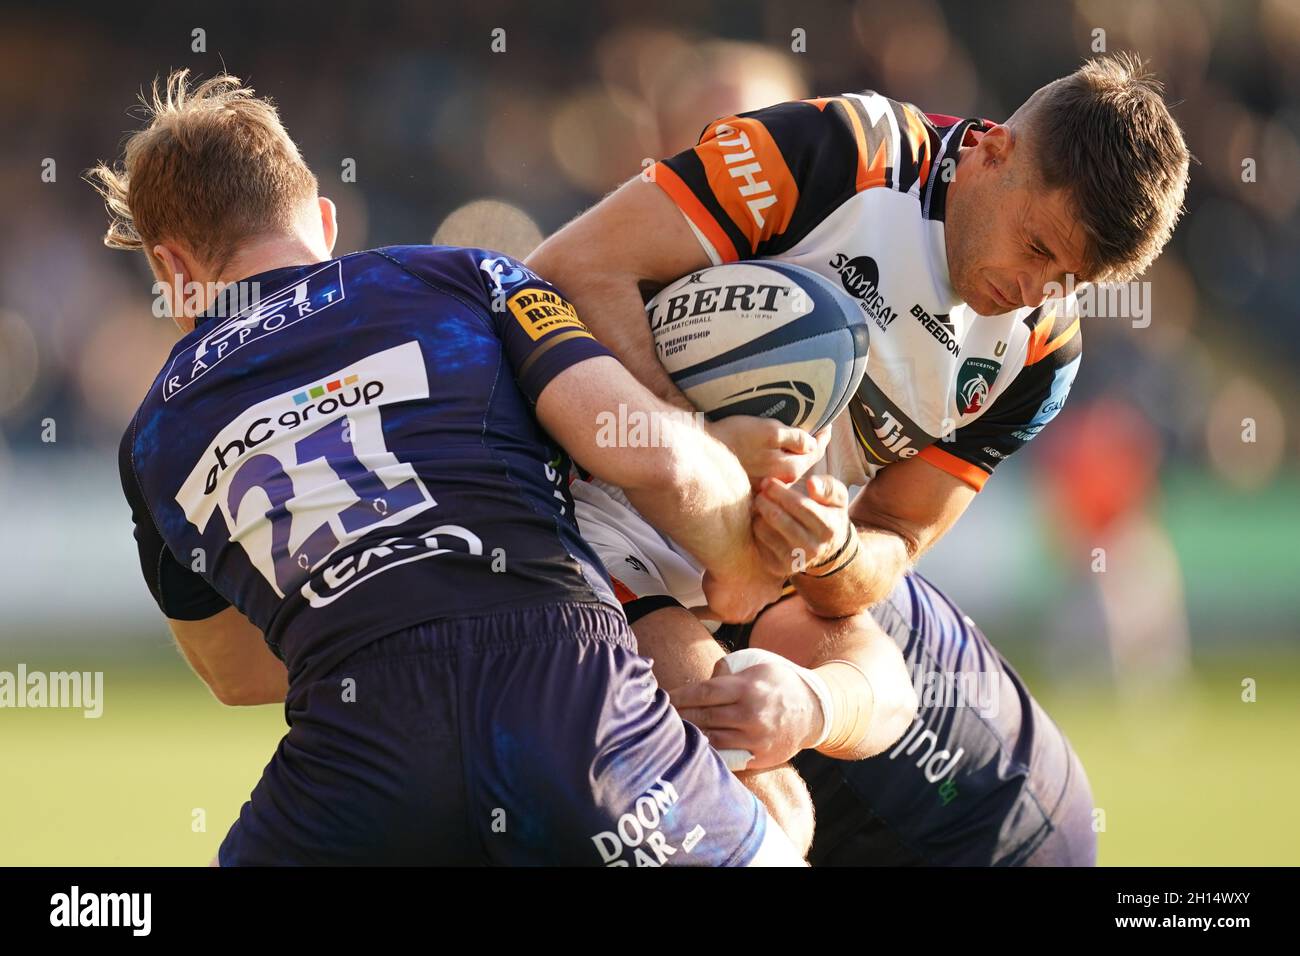 Leicester Tigers' Richard Wigglesworth (right) tackled by Worcester Warriors' Gareth Simpson during the Gallagher Premiership match at Sixways Stadium, Worcester. Picture date: Saturday October 16, 2021. Stock Photo